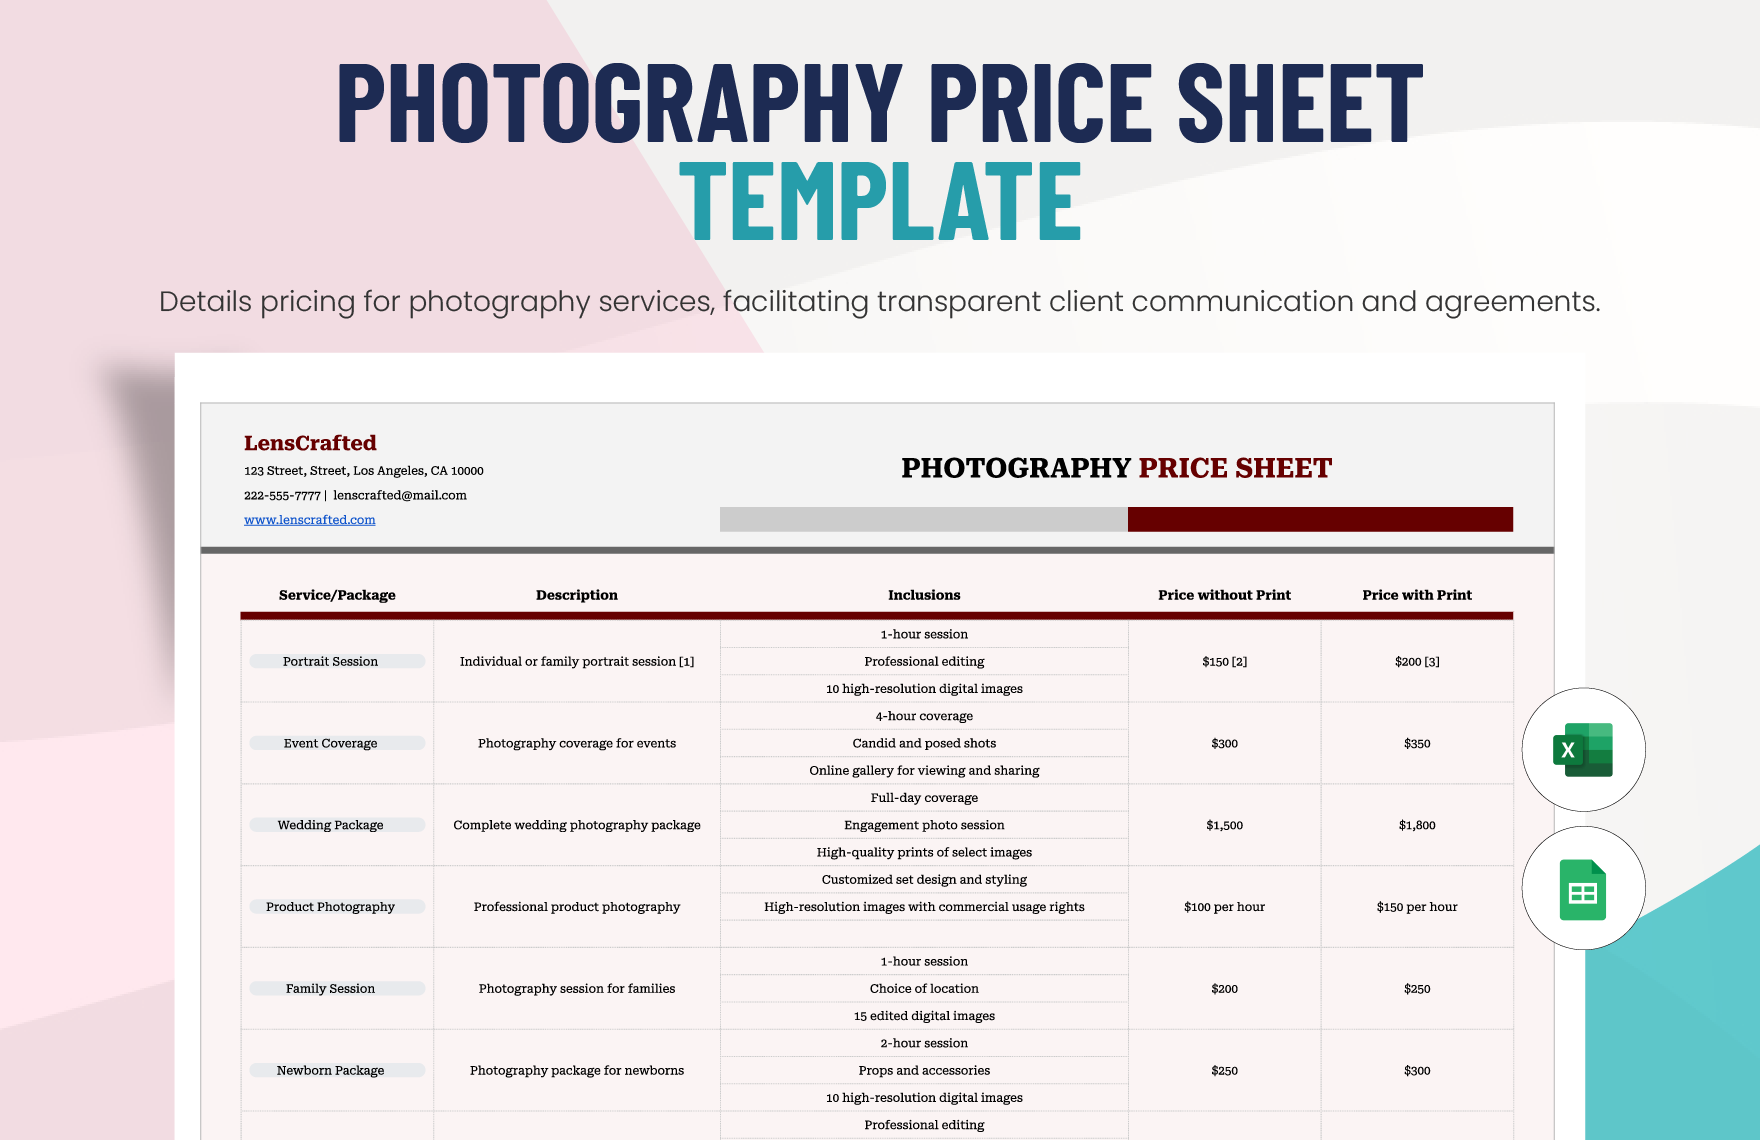 Production Run Sheet Template in Pages PDF Word Google Docs